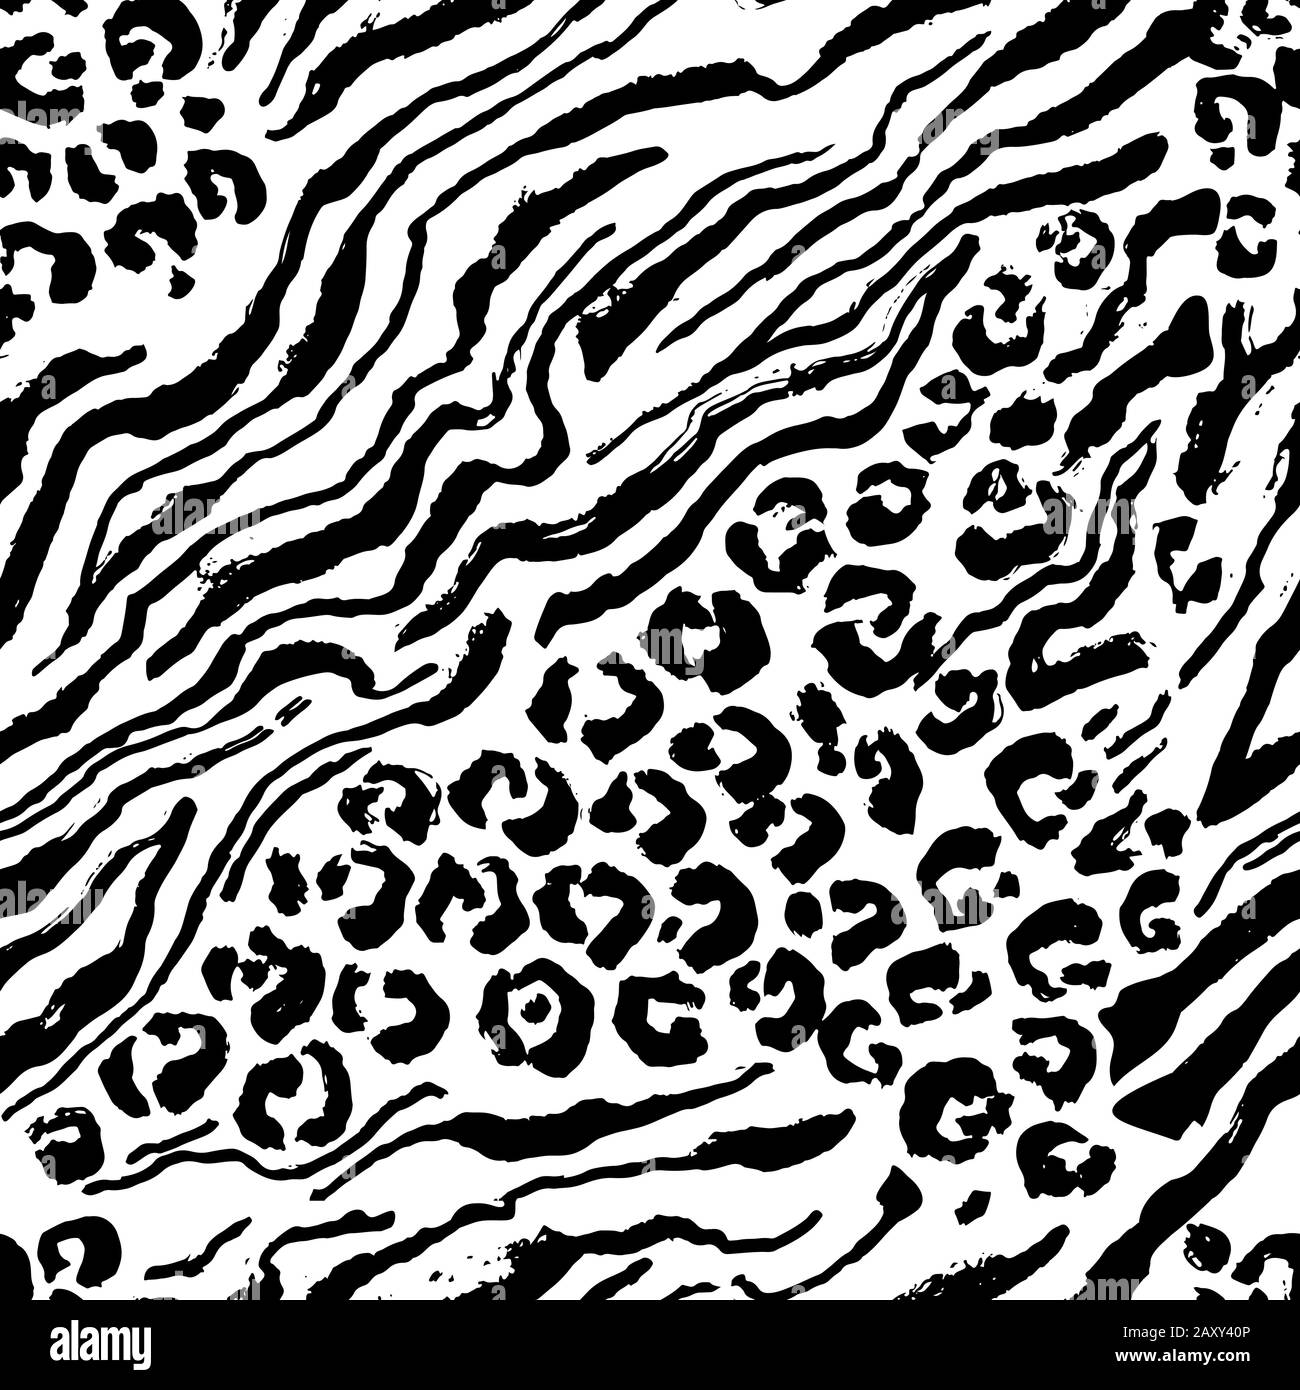 Leopard print seamless pattern. Black and white hand drawn background ...